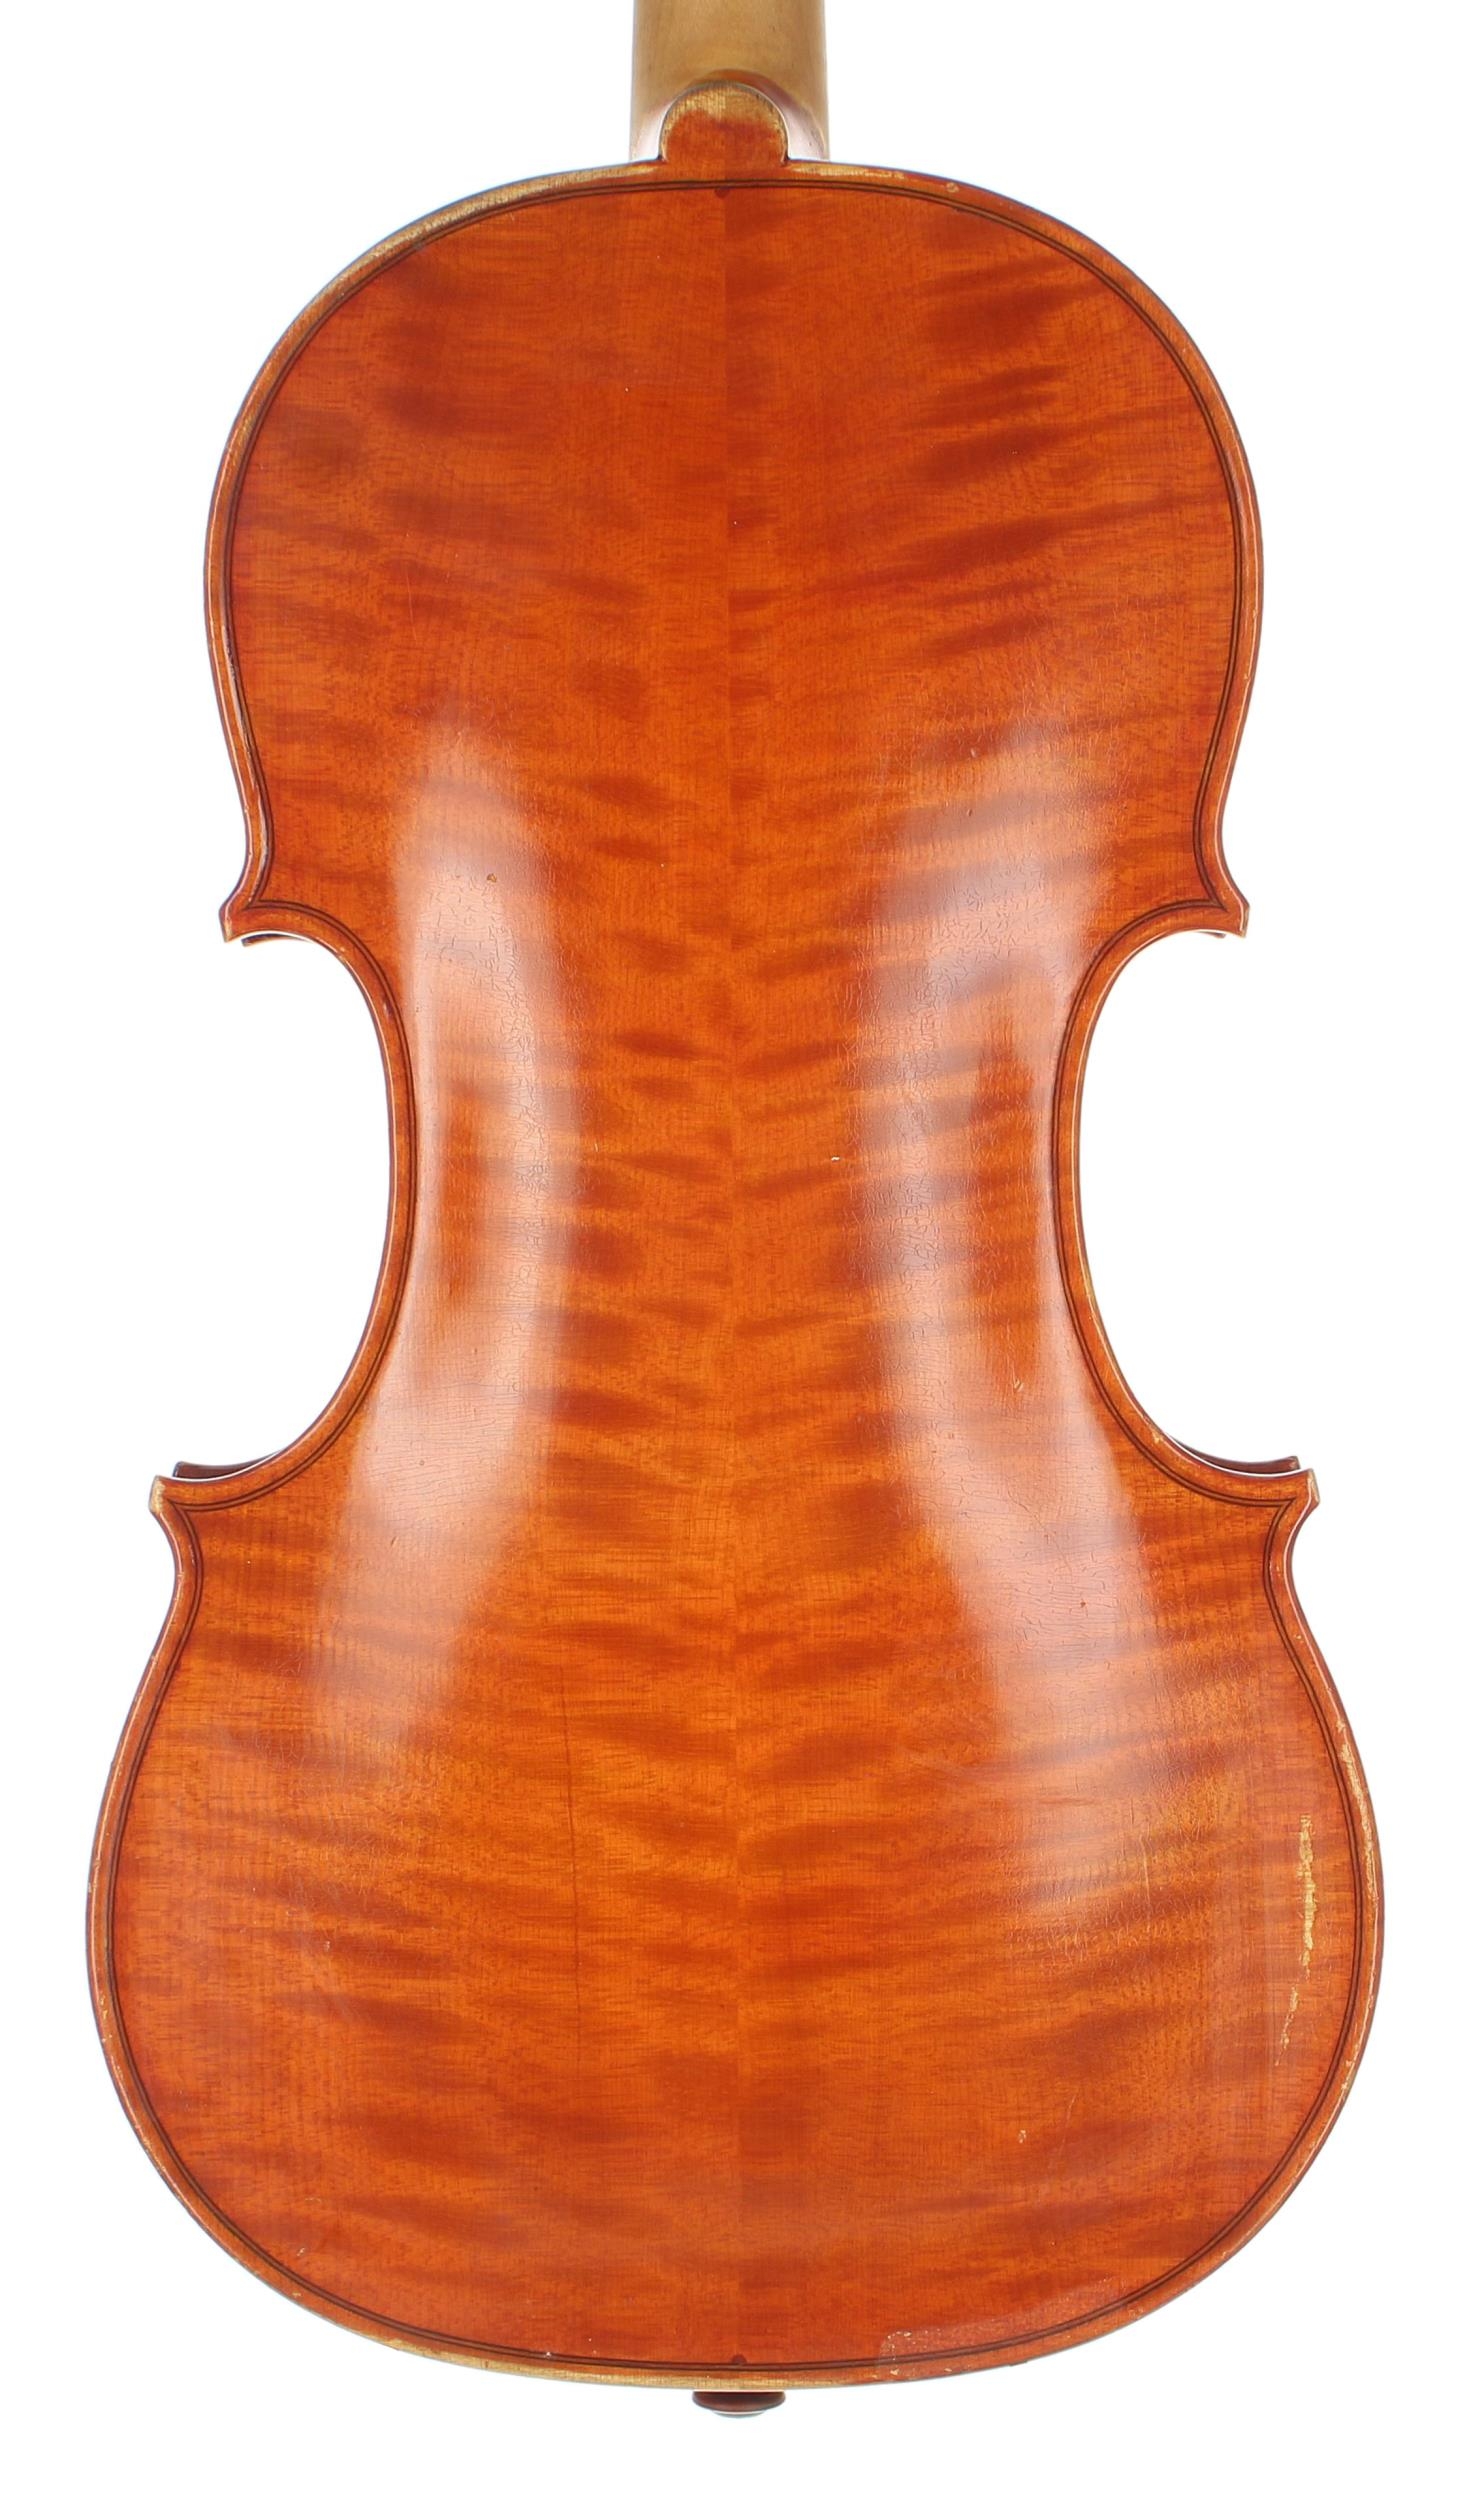 Violin by and labelled Jan Kudanowski, Fecit Birmingham Anno 1980, no. 89, the two piece back of - Image 2 of 3